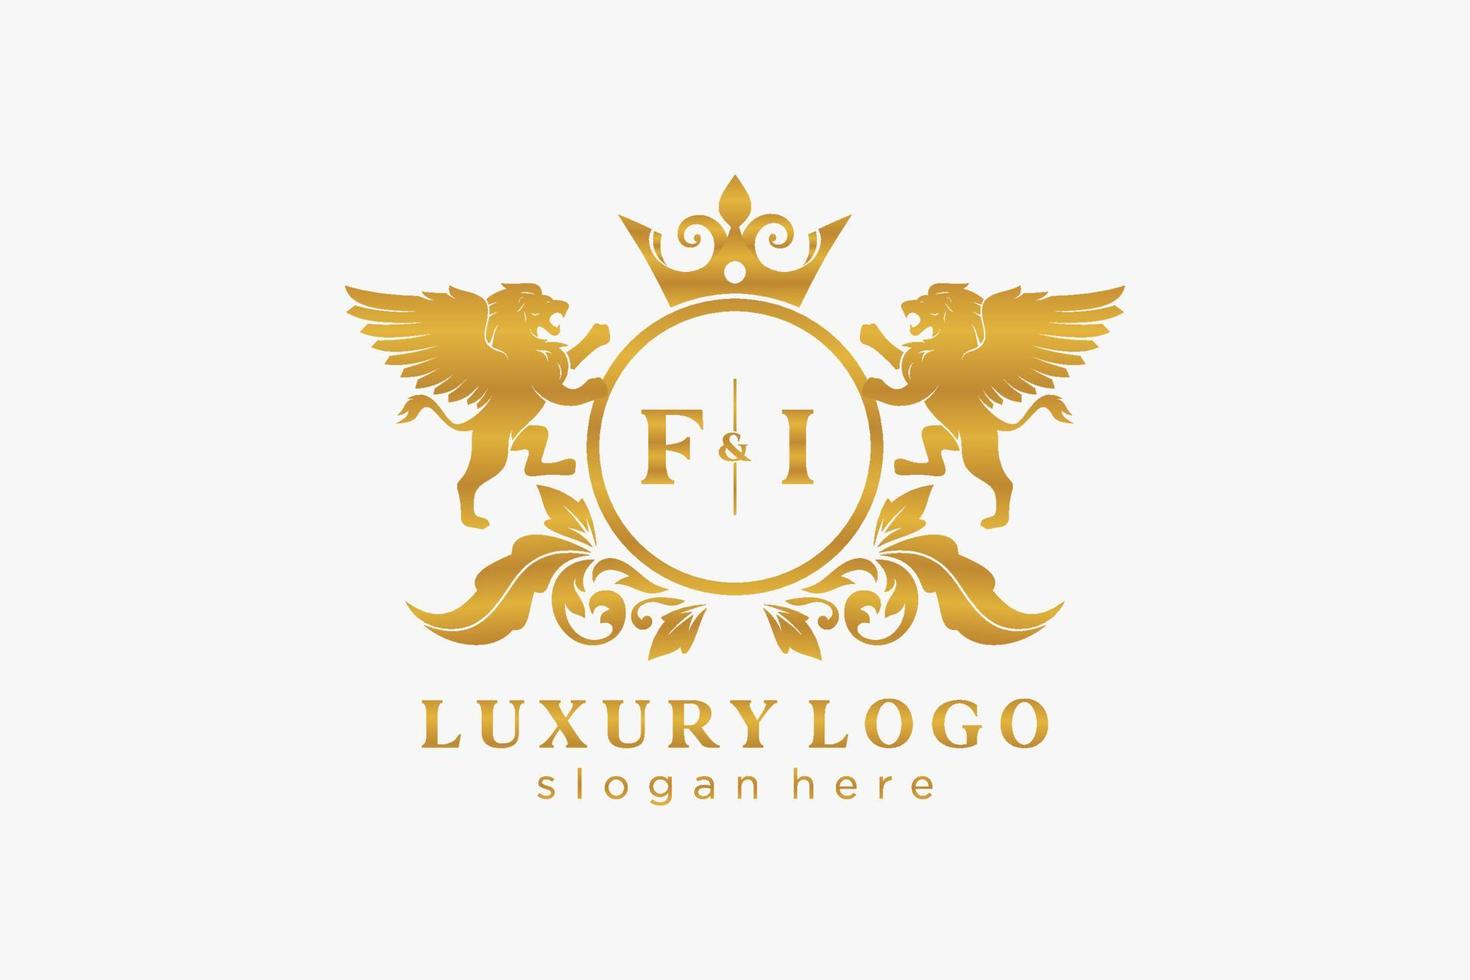 Initial FI Letter Lion Royal Luxury Logo template in vector art for Restaurant, Royalty, Boutique, Cafe, Hotel, Heraldic, Jewelry, Fashion and other vector illustration.